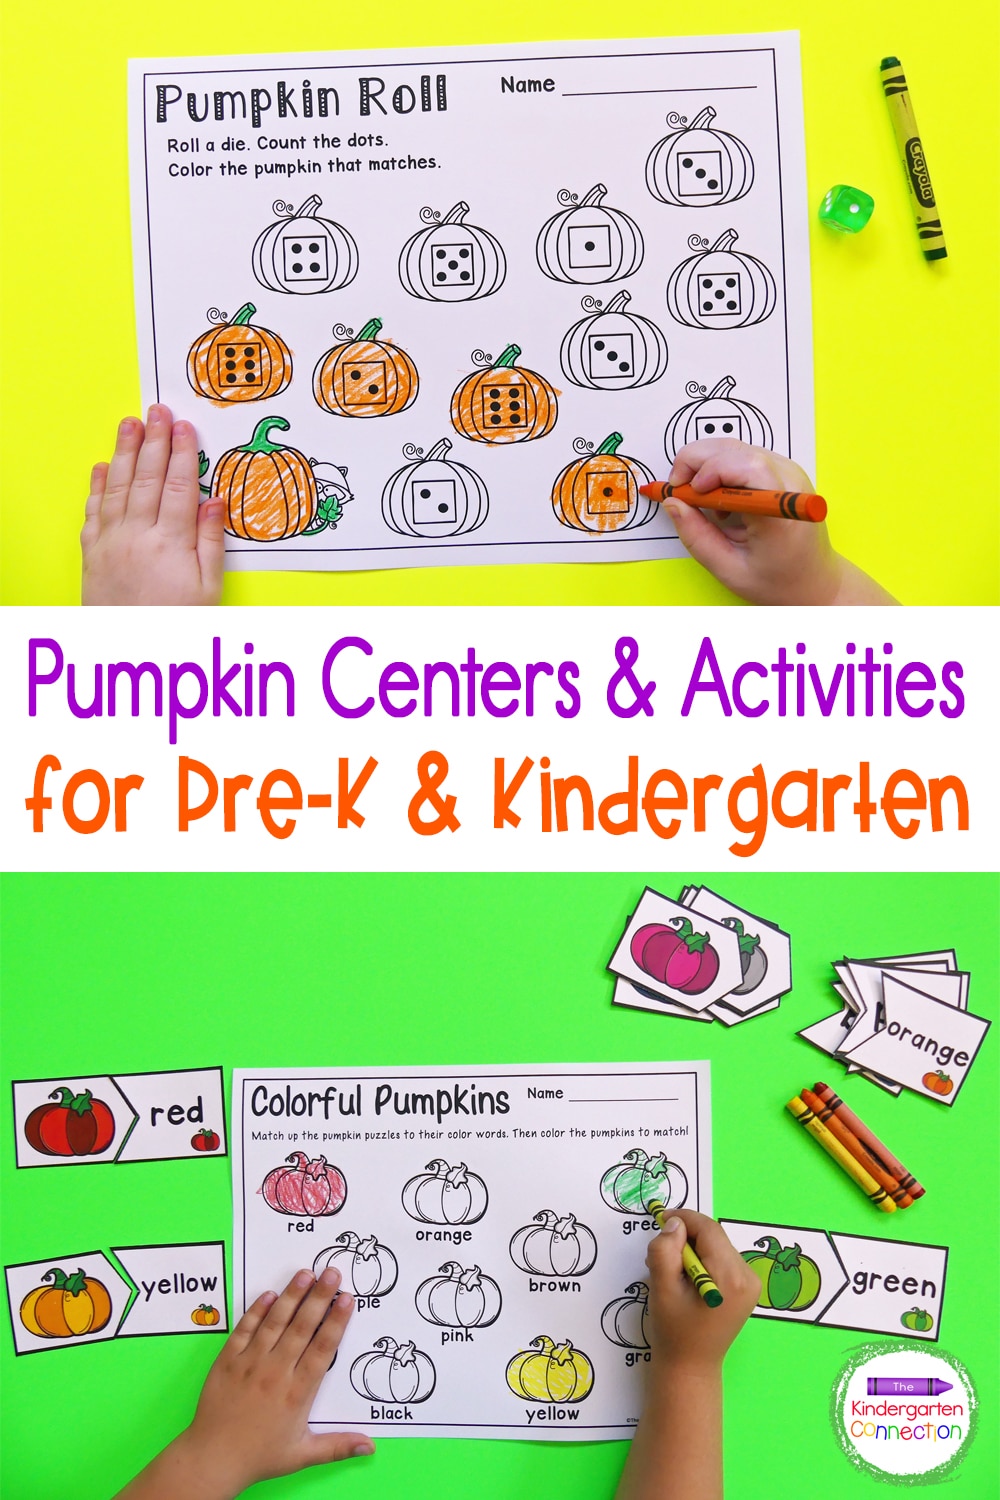 These Pumpkin Centers and Activities are perfect for Pre-K & Kindergarten students working on letters, sight words, numbers, and more!